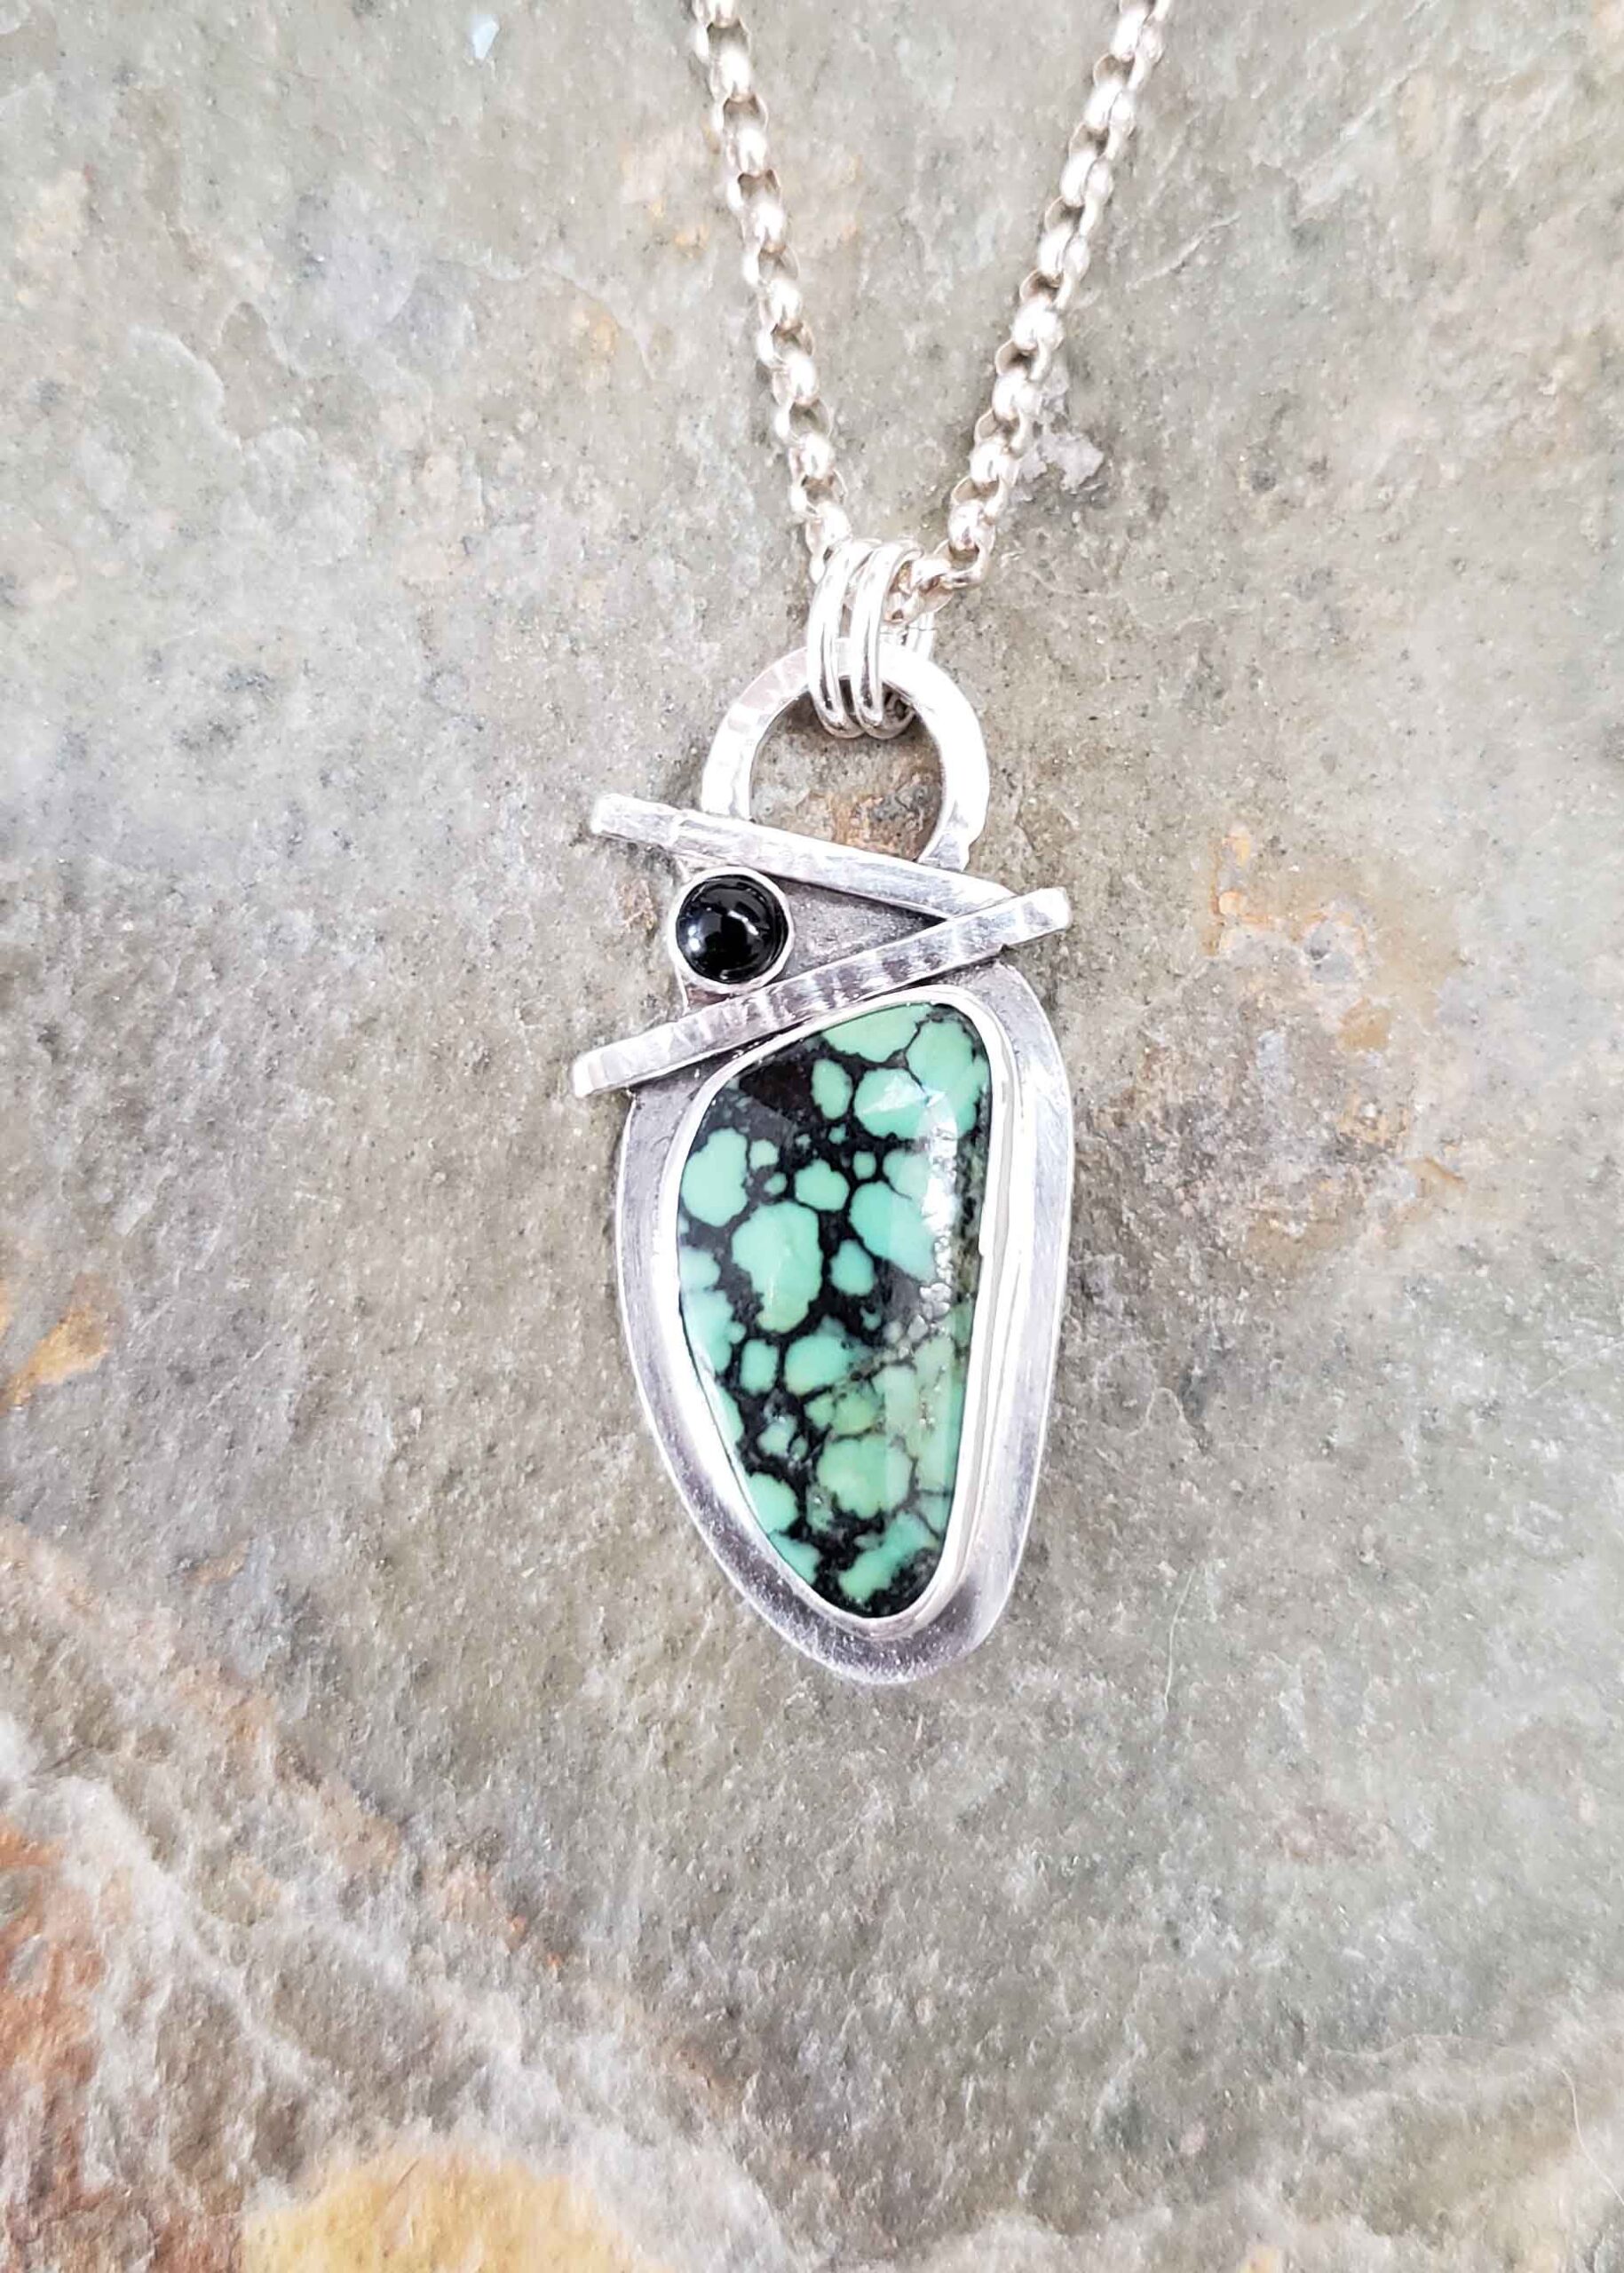 Silver pendant in turquoise and black onyx by Dona Miller.